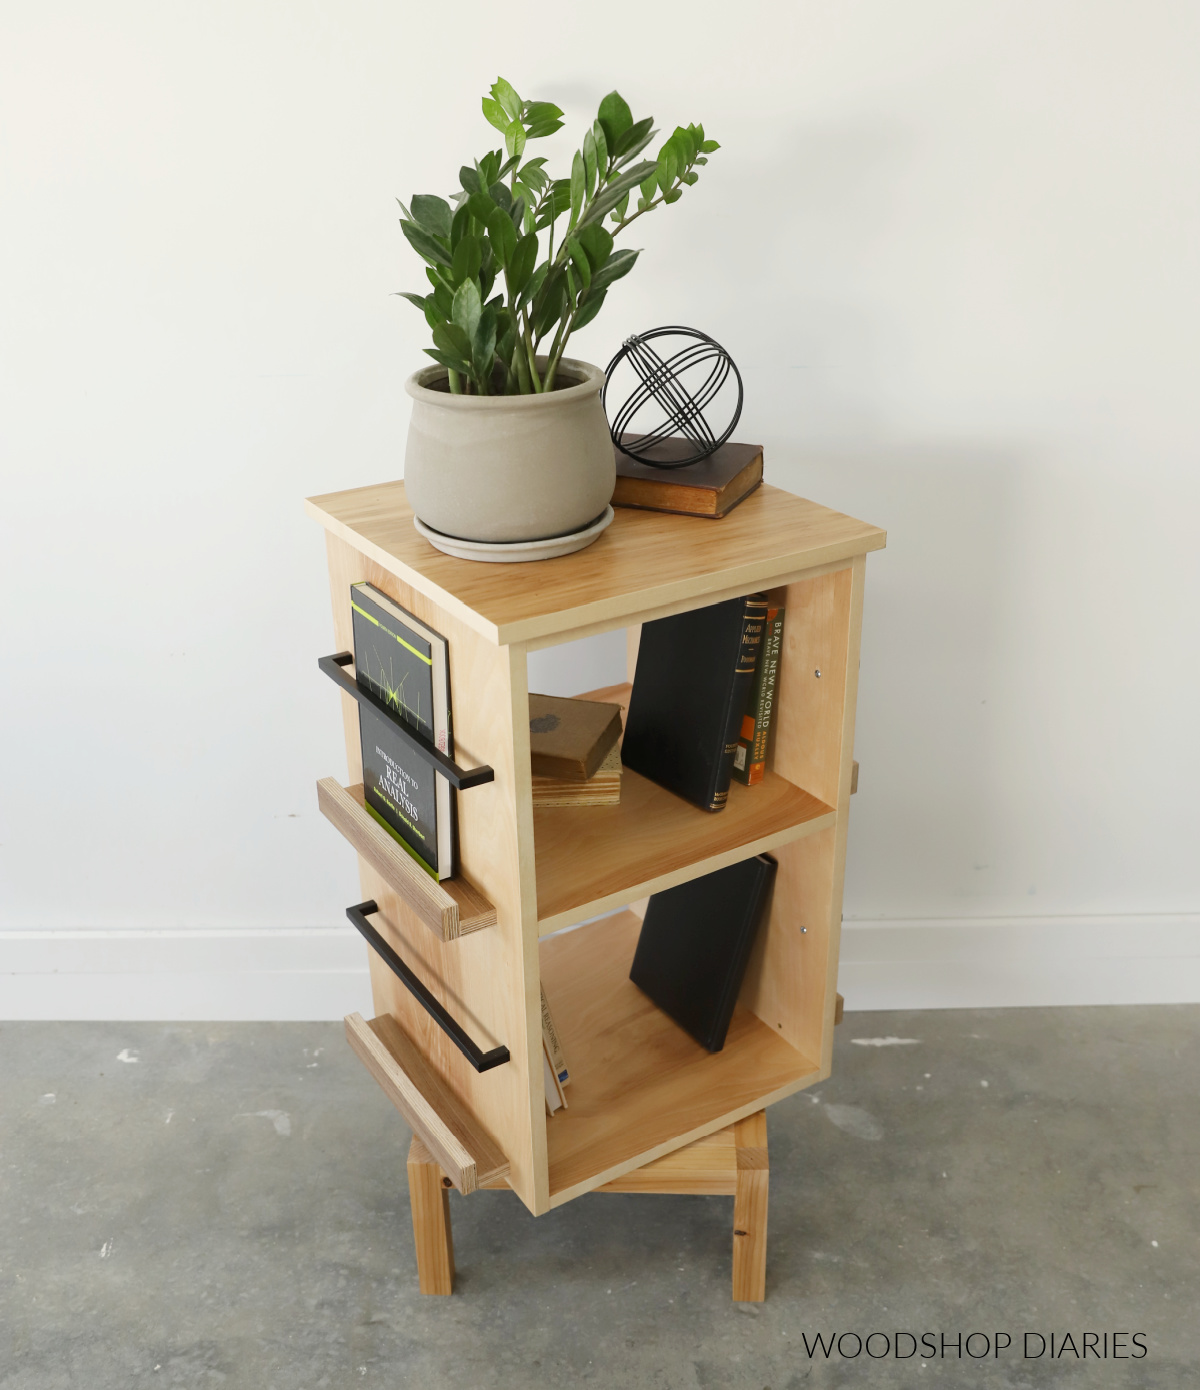 DIY Rotating bookshelf assembled with plywood--open cubbies in the middle with book ledges on the sides